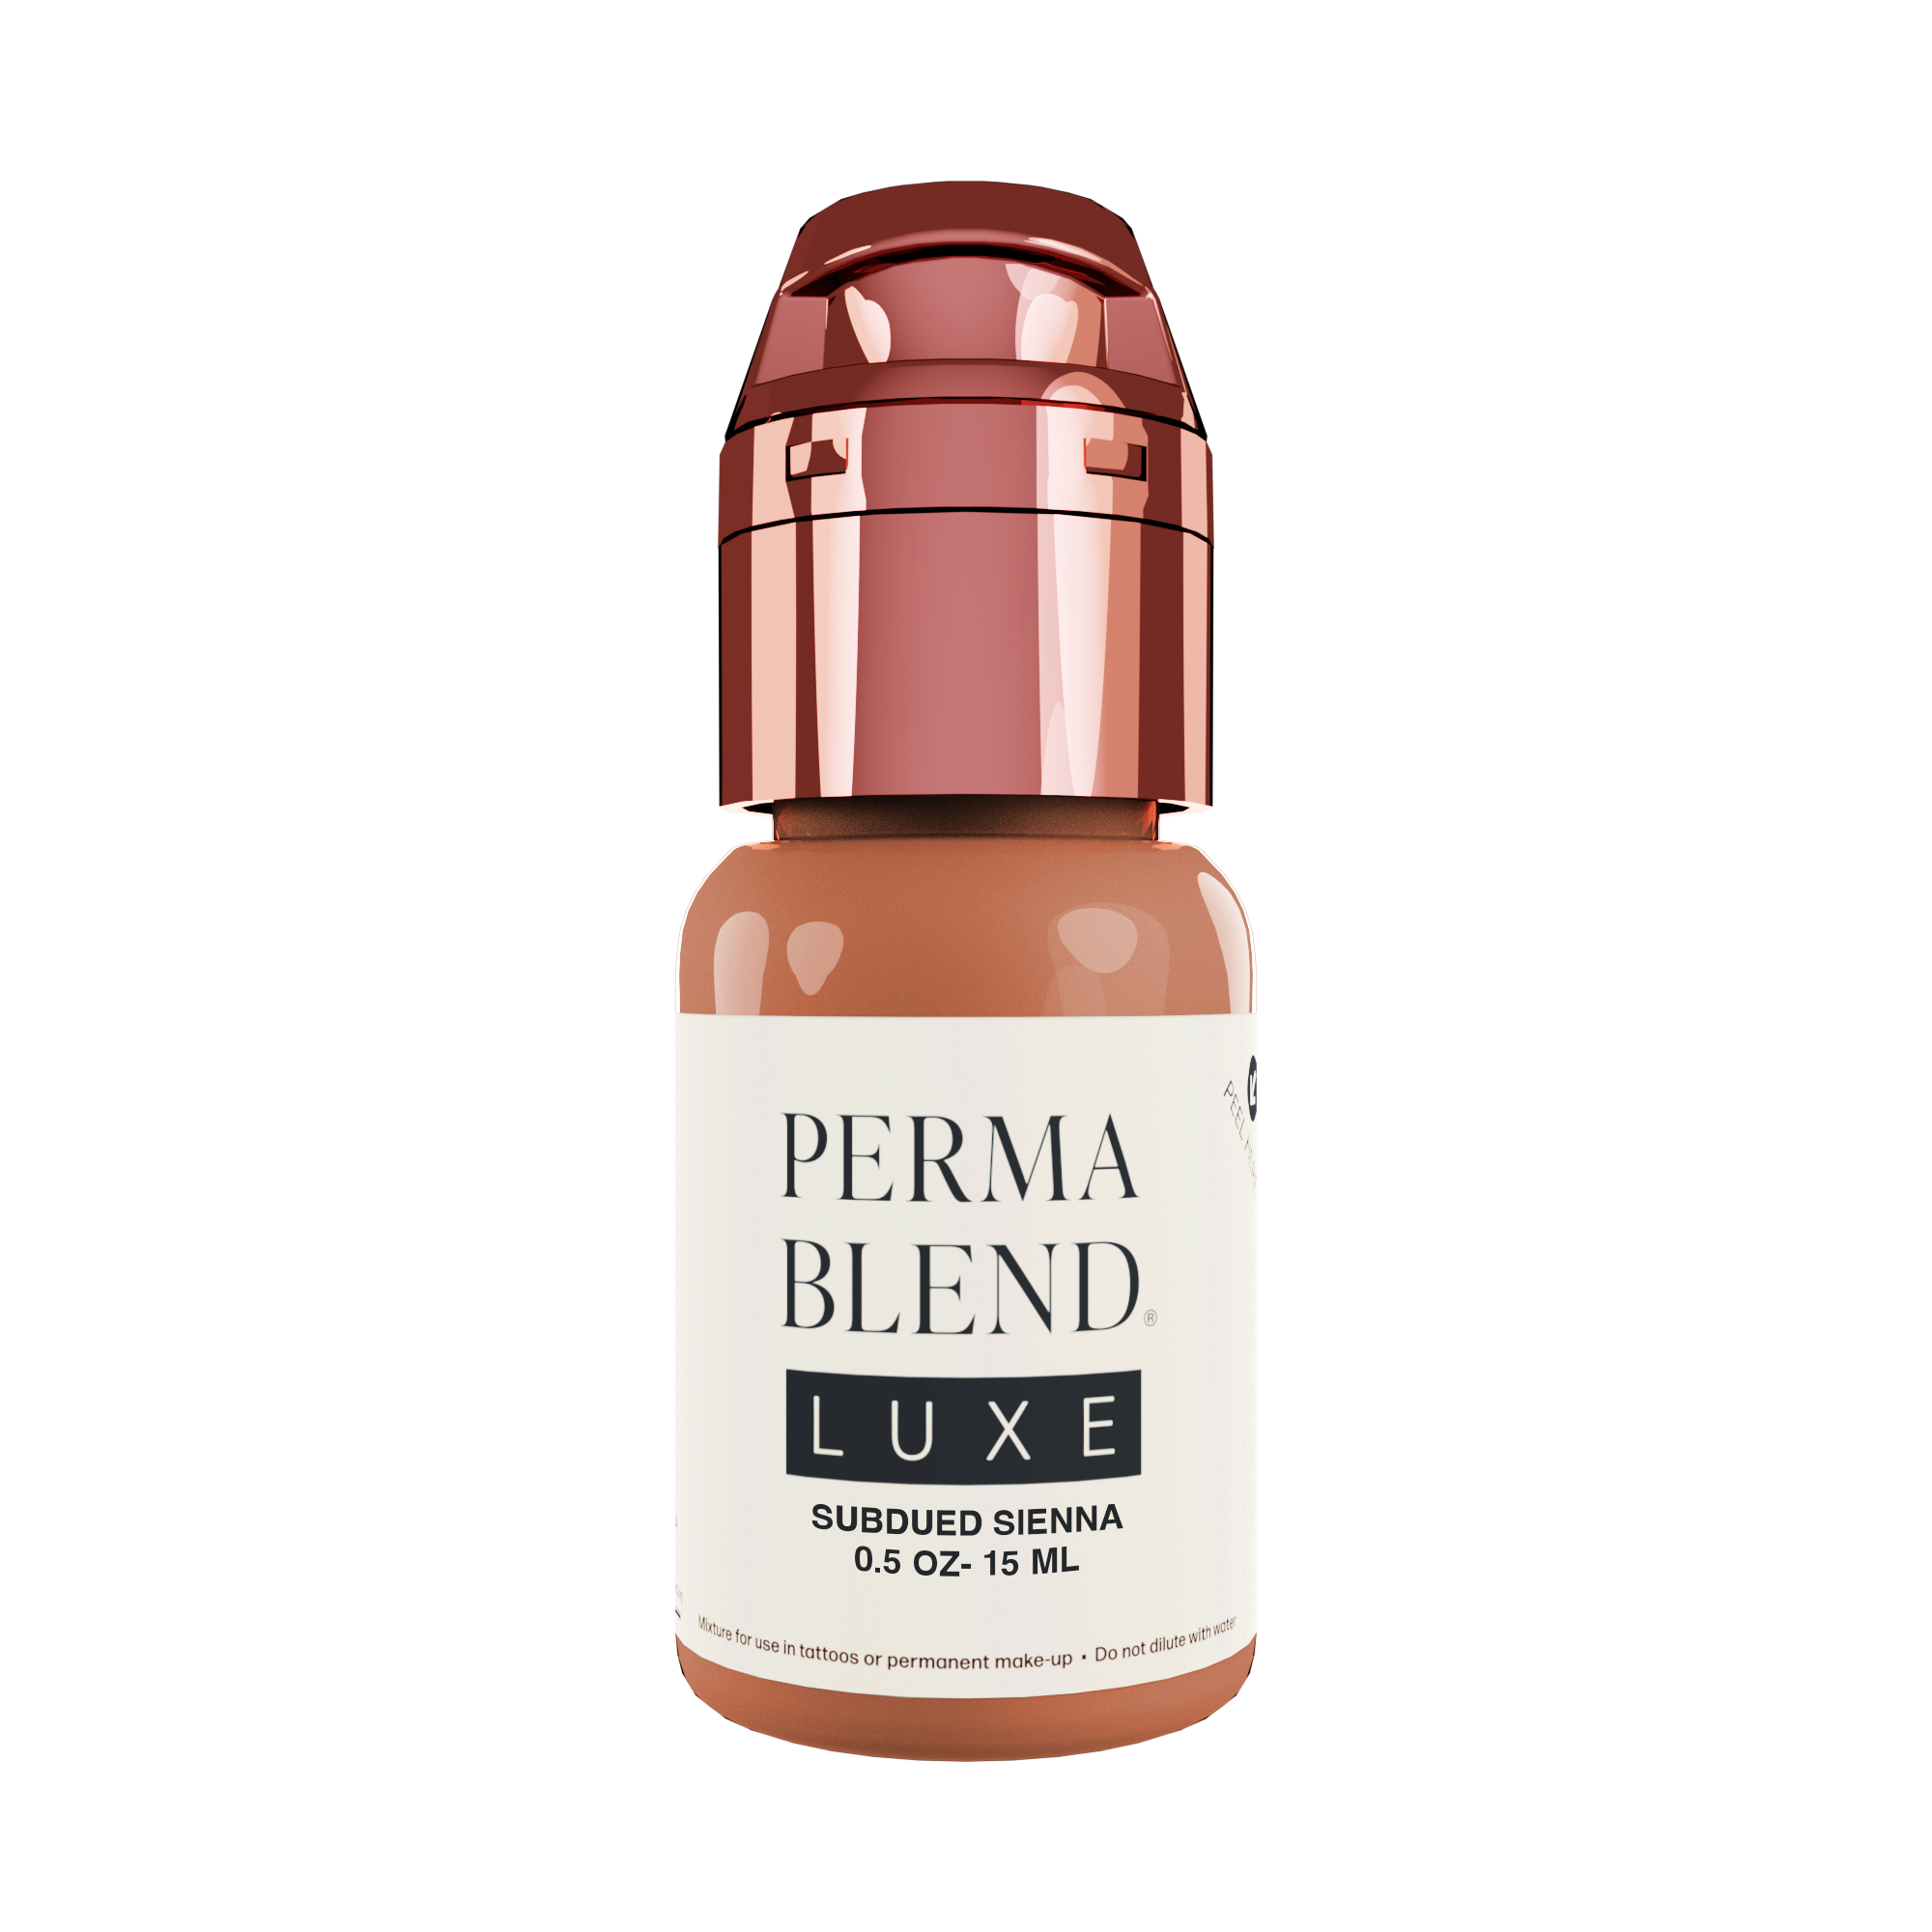 Perma Blend Luxe - SUBDUED SIENNA - lip pigment 15ml